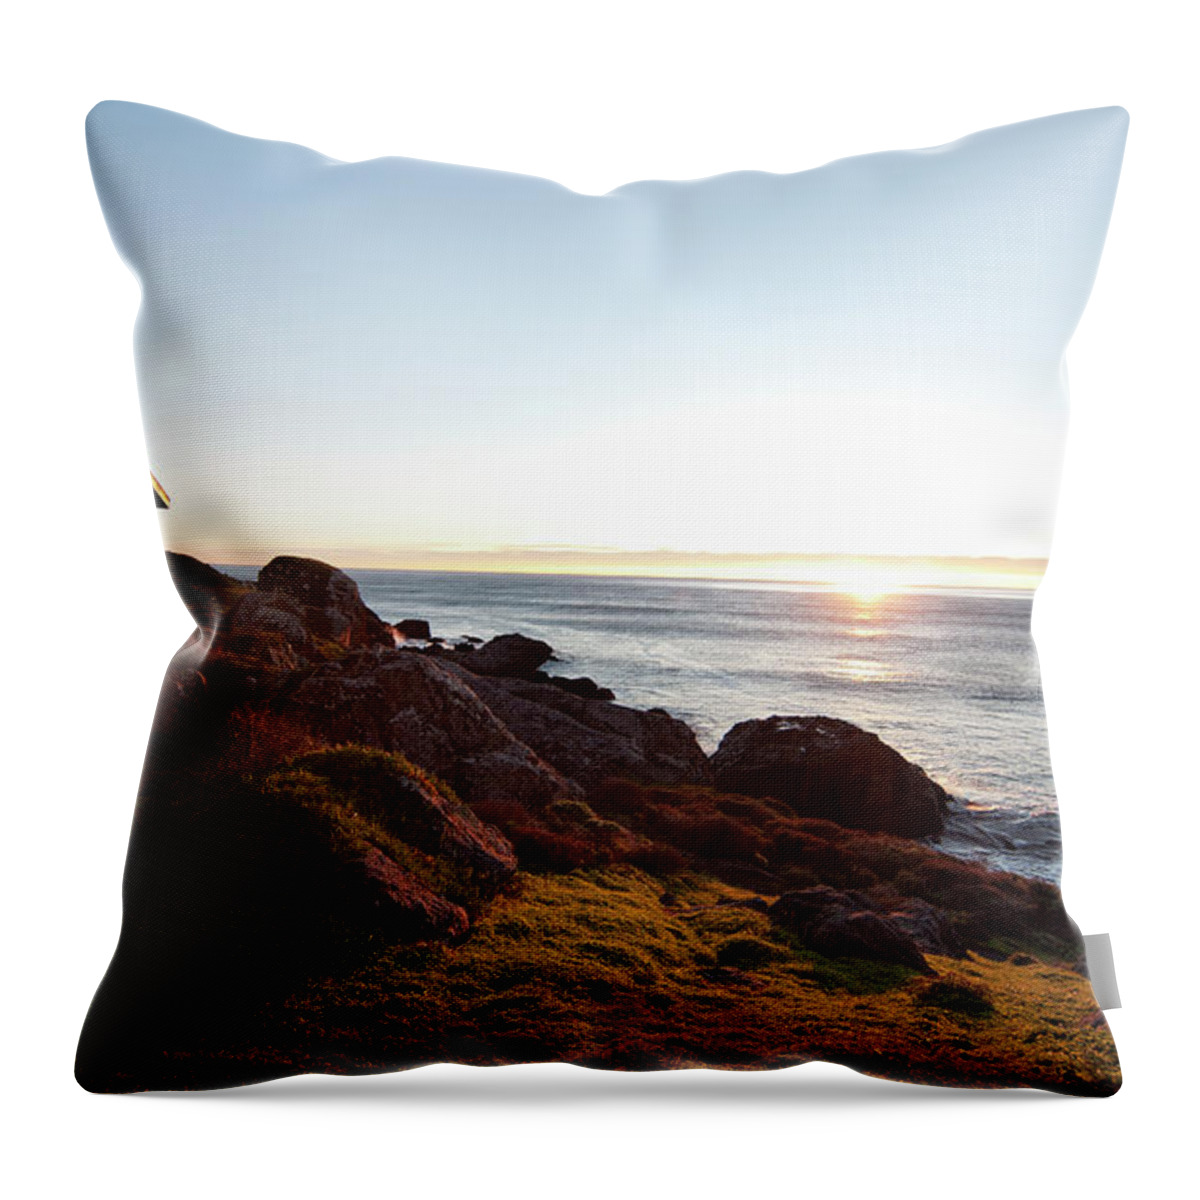 Tranquility Throw Pillow featuring the photograph Rustic Wooden Cabin And Pacific Ocean by Billy Hustace